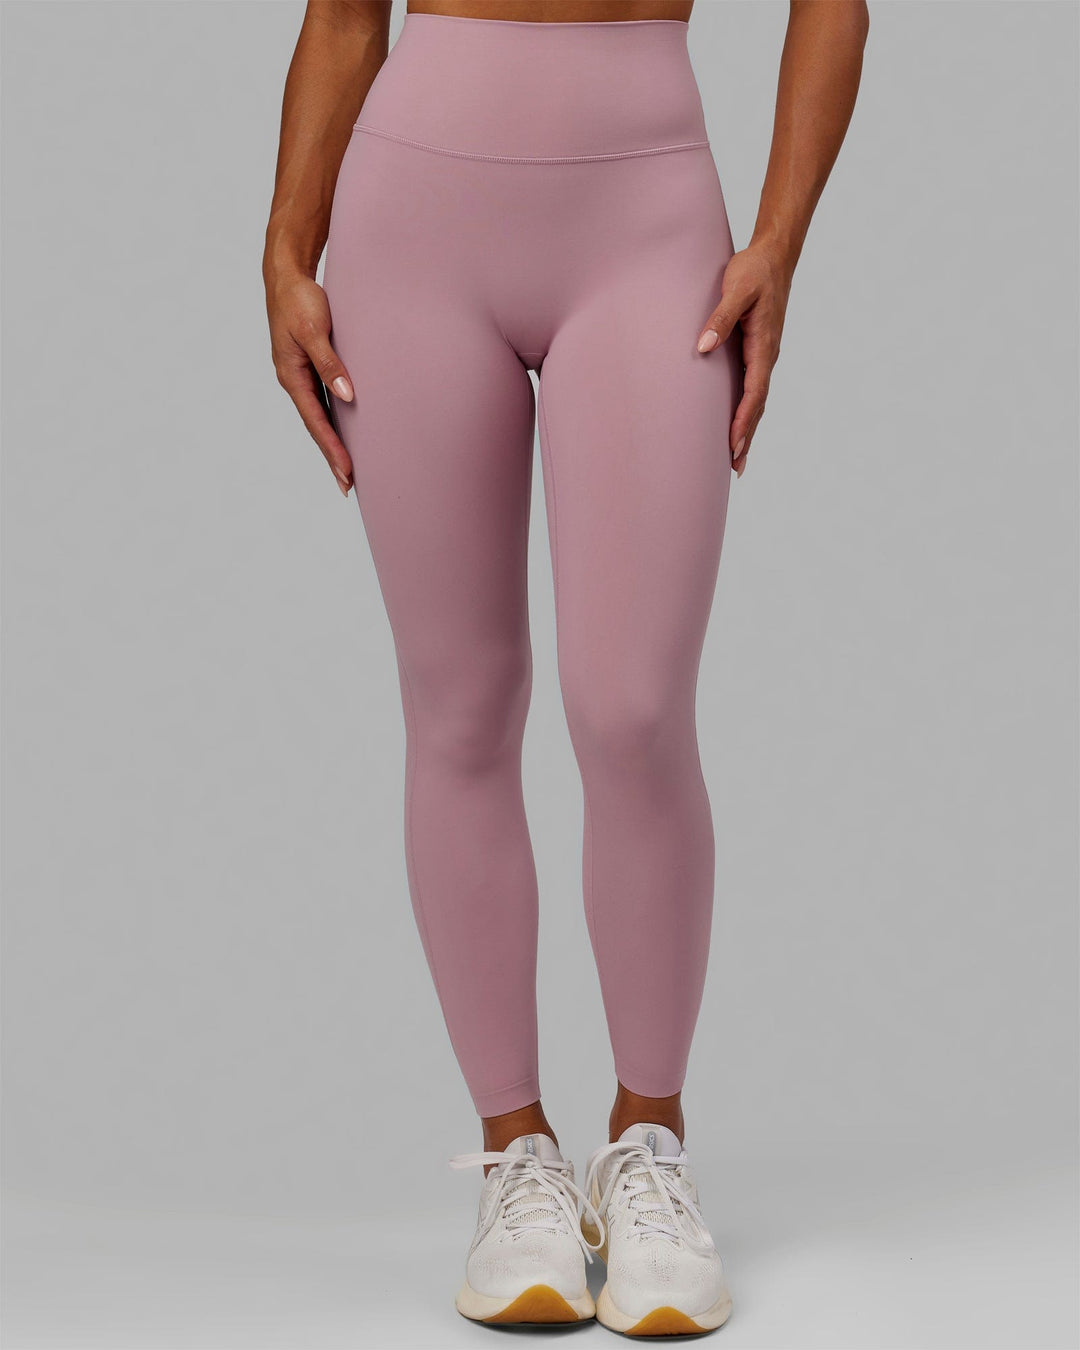 Elixir 7/8 Length Tights - Cosmetic Pink